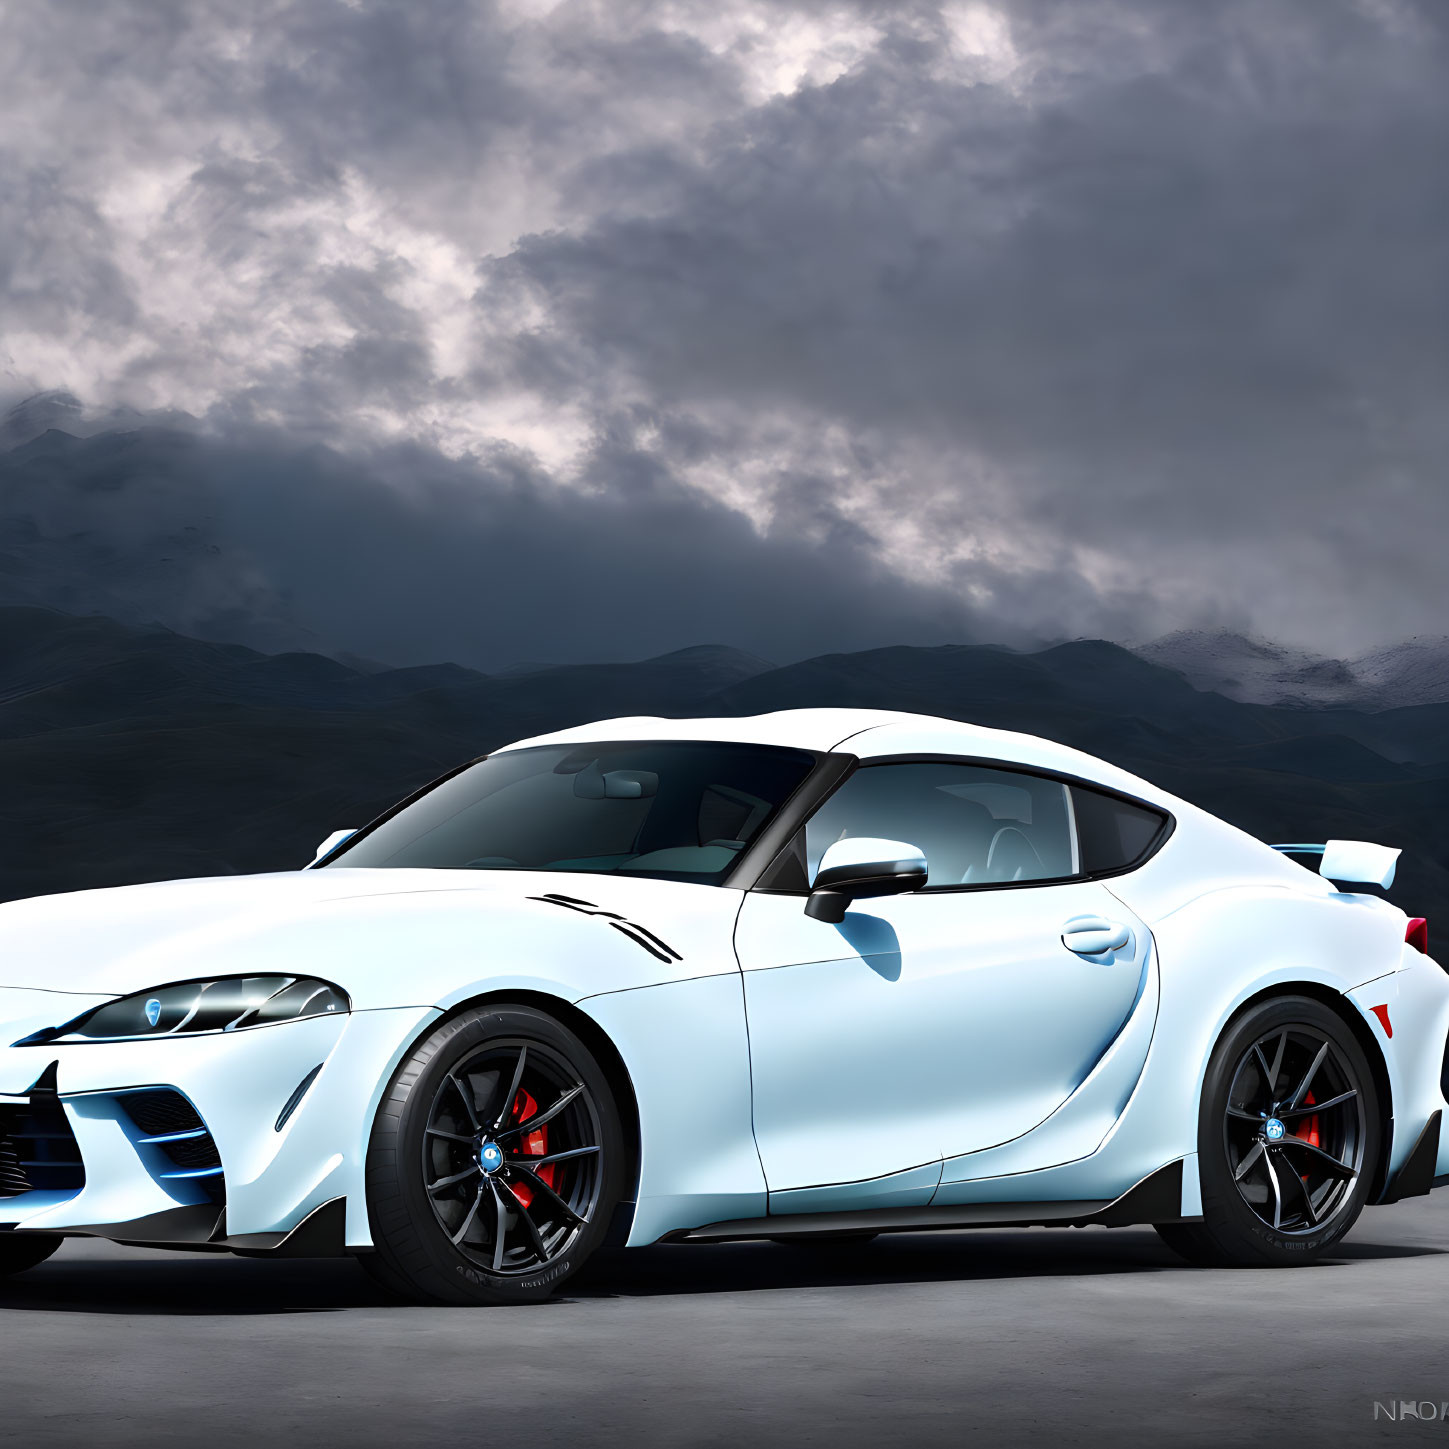 White Sports Car with Black Accents and Red Brake Calipers Against Stormy Clouds